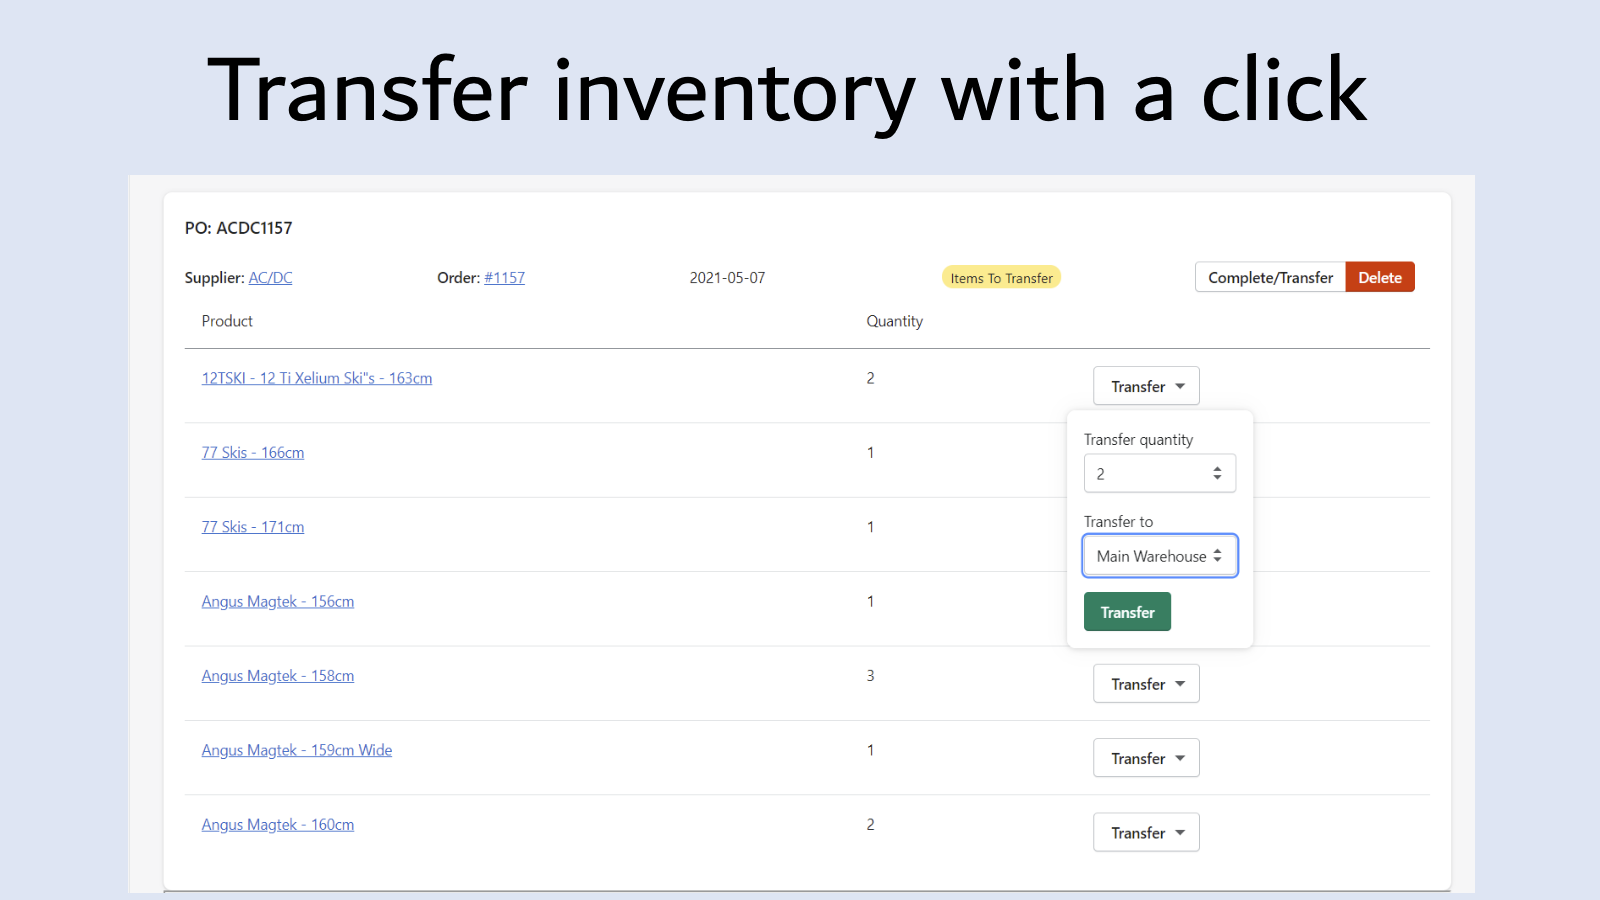 Transfer inventory with a click